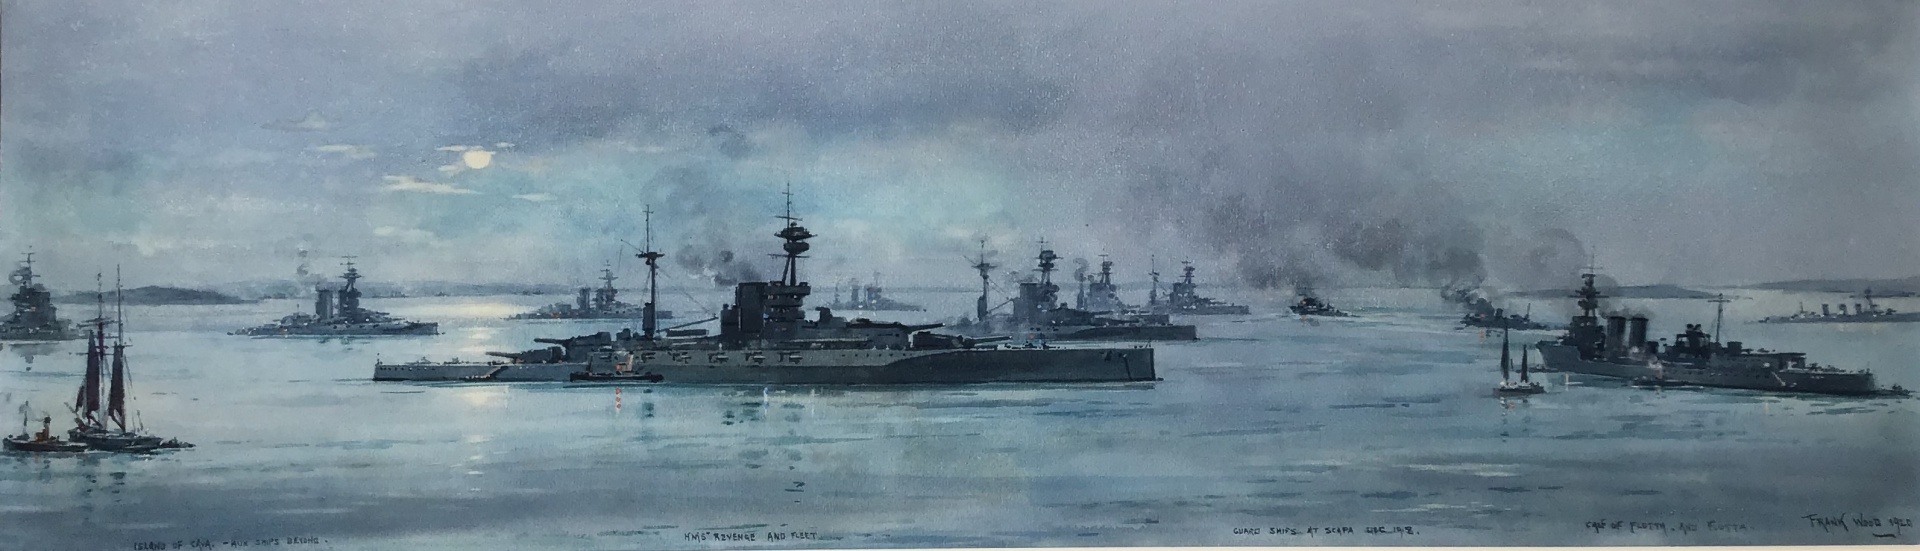 Capital ships of the Grand Fleet at Scapa Flow, December 1918